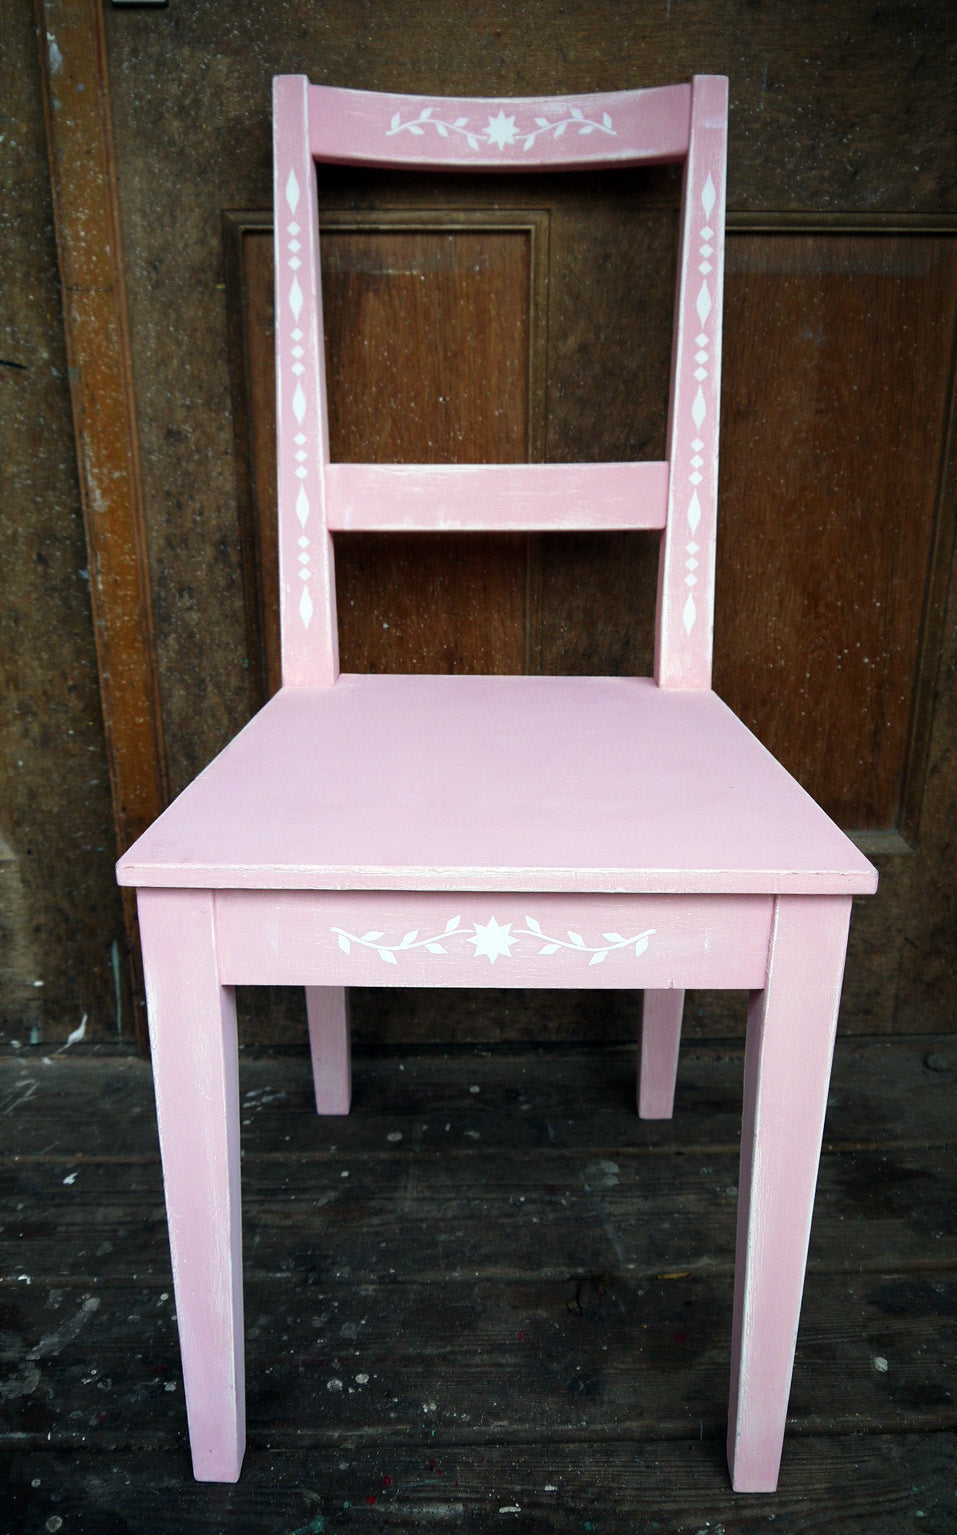 IKEA chair update painted in white and pik with bautiful folk art white stencil design - all profits got to Maggies Cancer Centres in aid of Breast Cancer Awarness Month